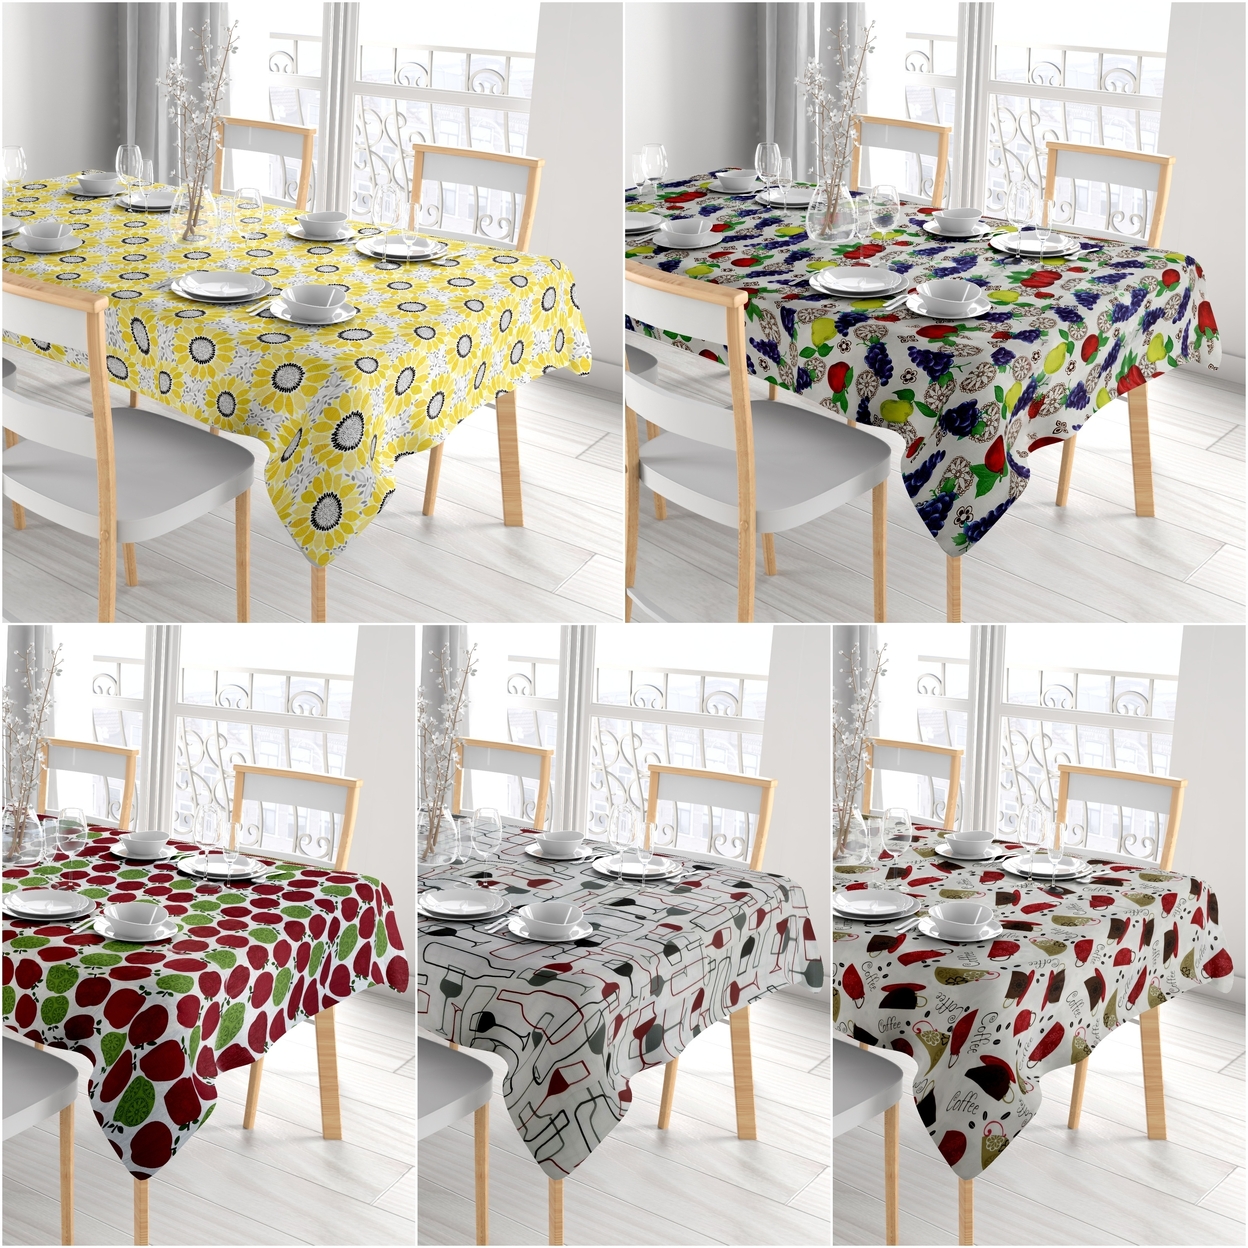 Kitchen Dining Water Resistant Oil Proof Flannel Back PVC Vinyl Tablecloth - 52'' X 52'', Solid